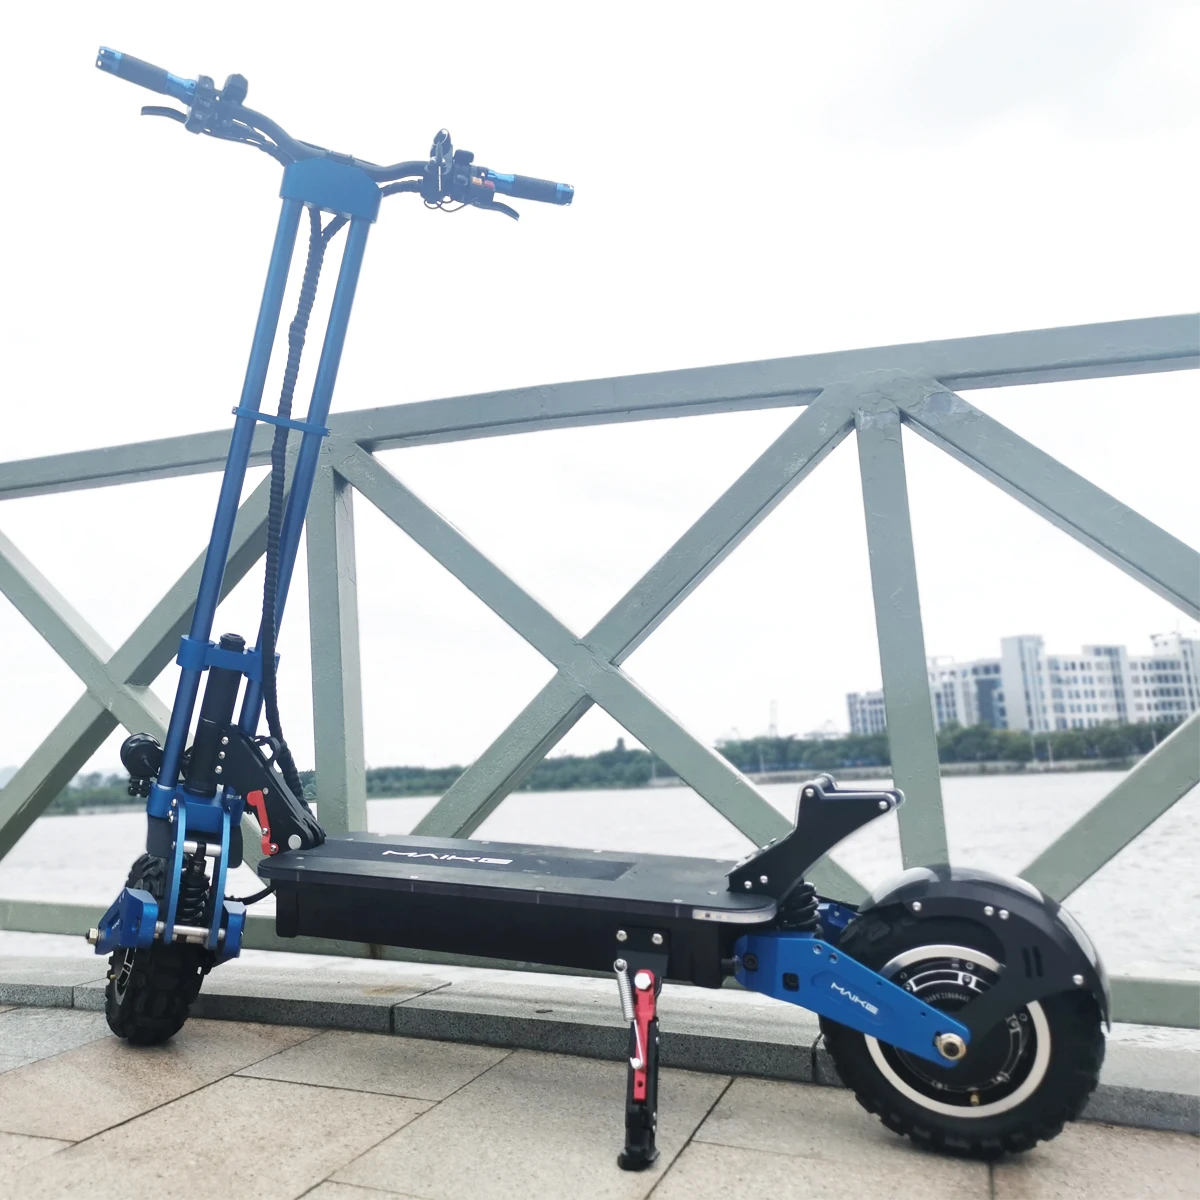 

China Best Price maike kk10s pro fast scooters with seats 5600w electric scooter high range 11 inch e scooter offroad